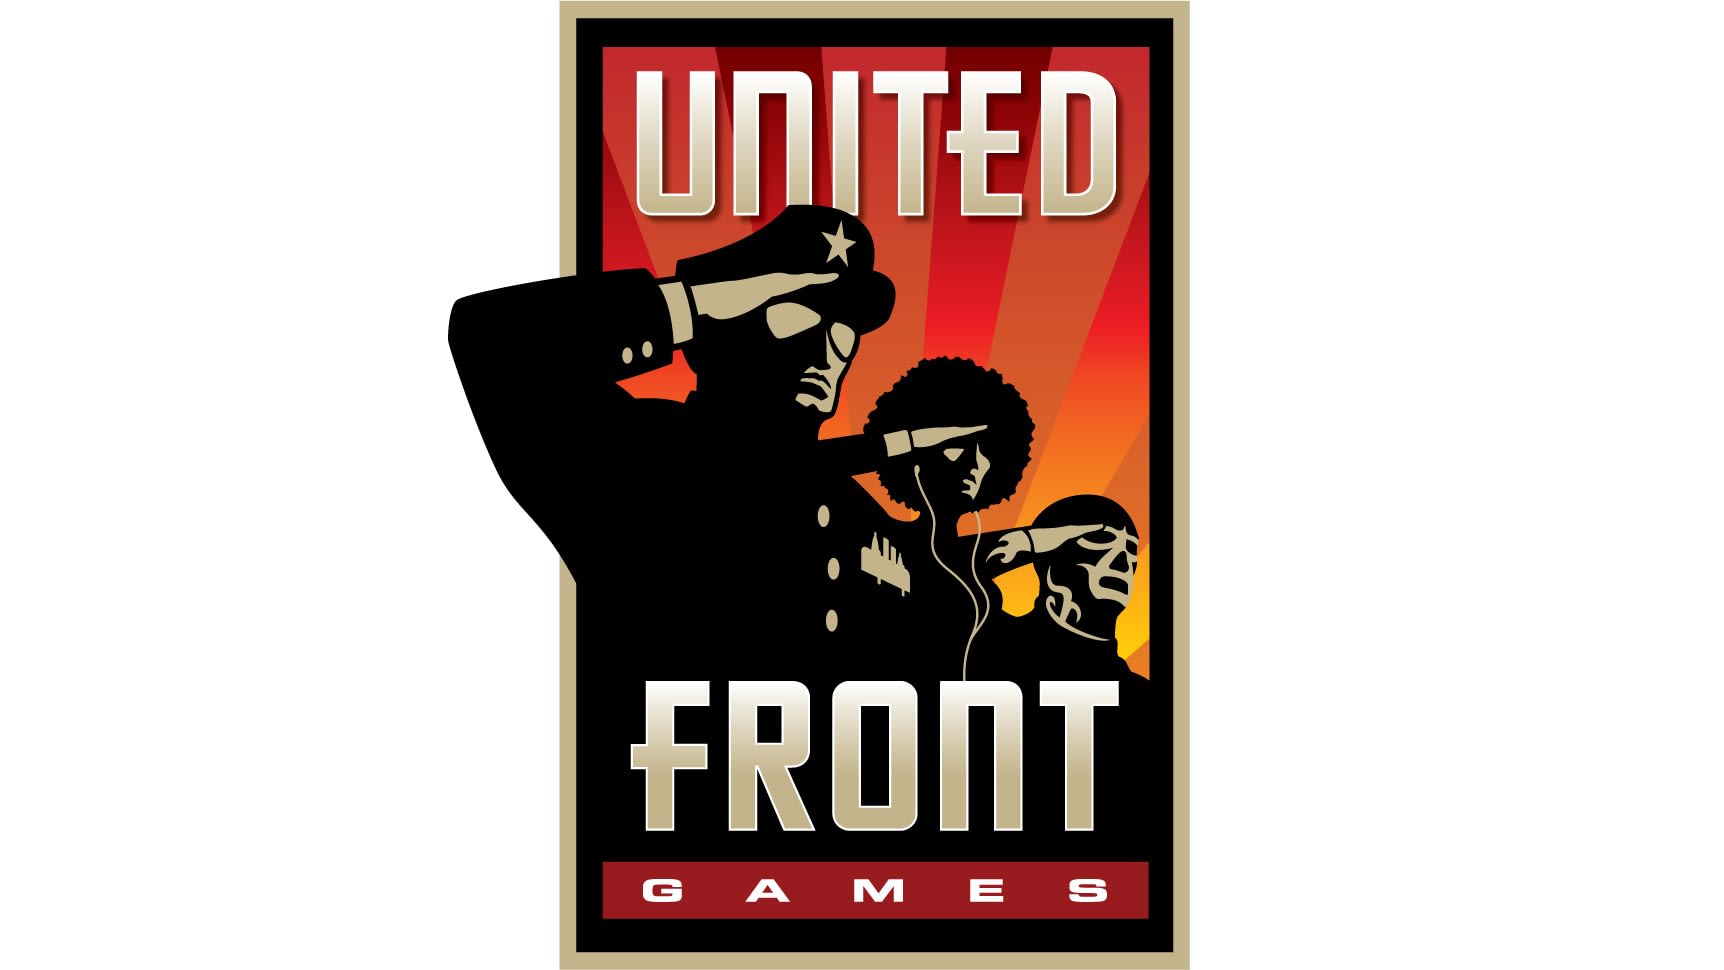 Game is closed. United Front. Фронт Гаме. The Front игра. United Front games их игры.